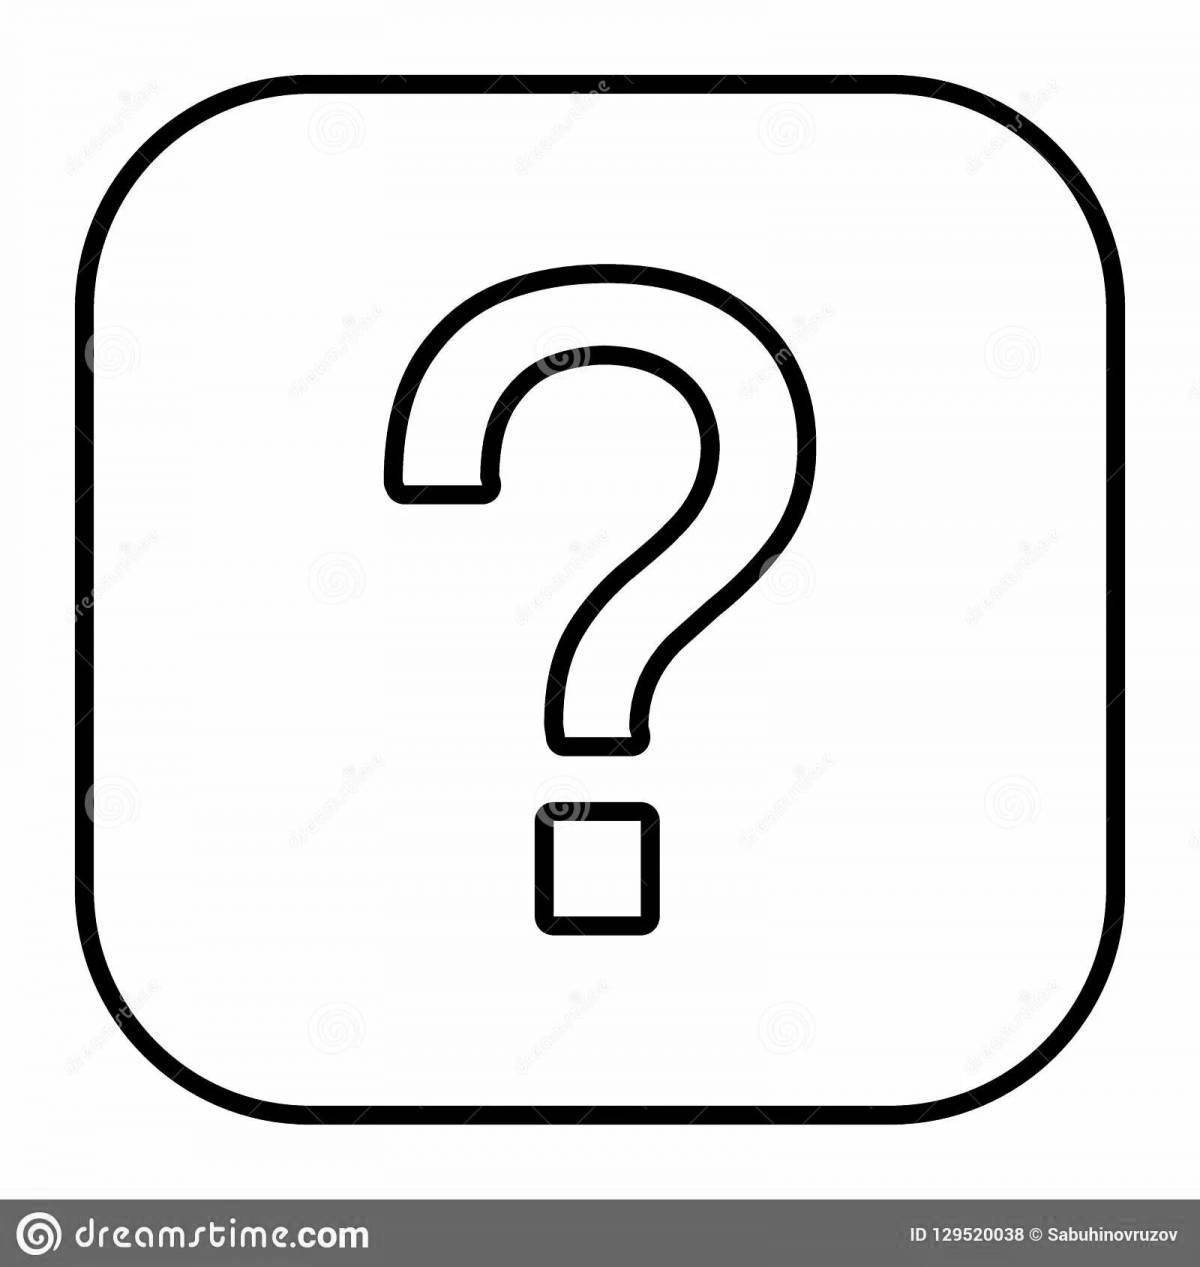 Mystical question mark coloring page